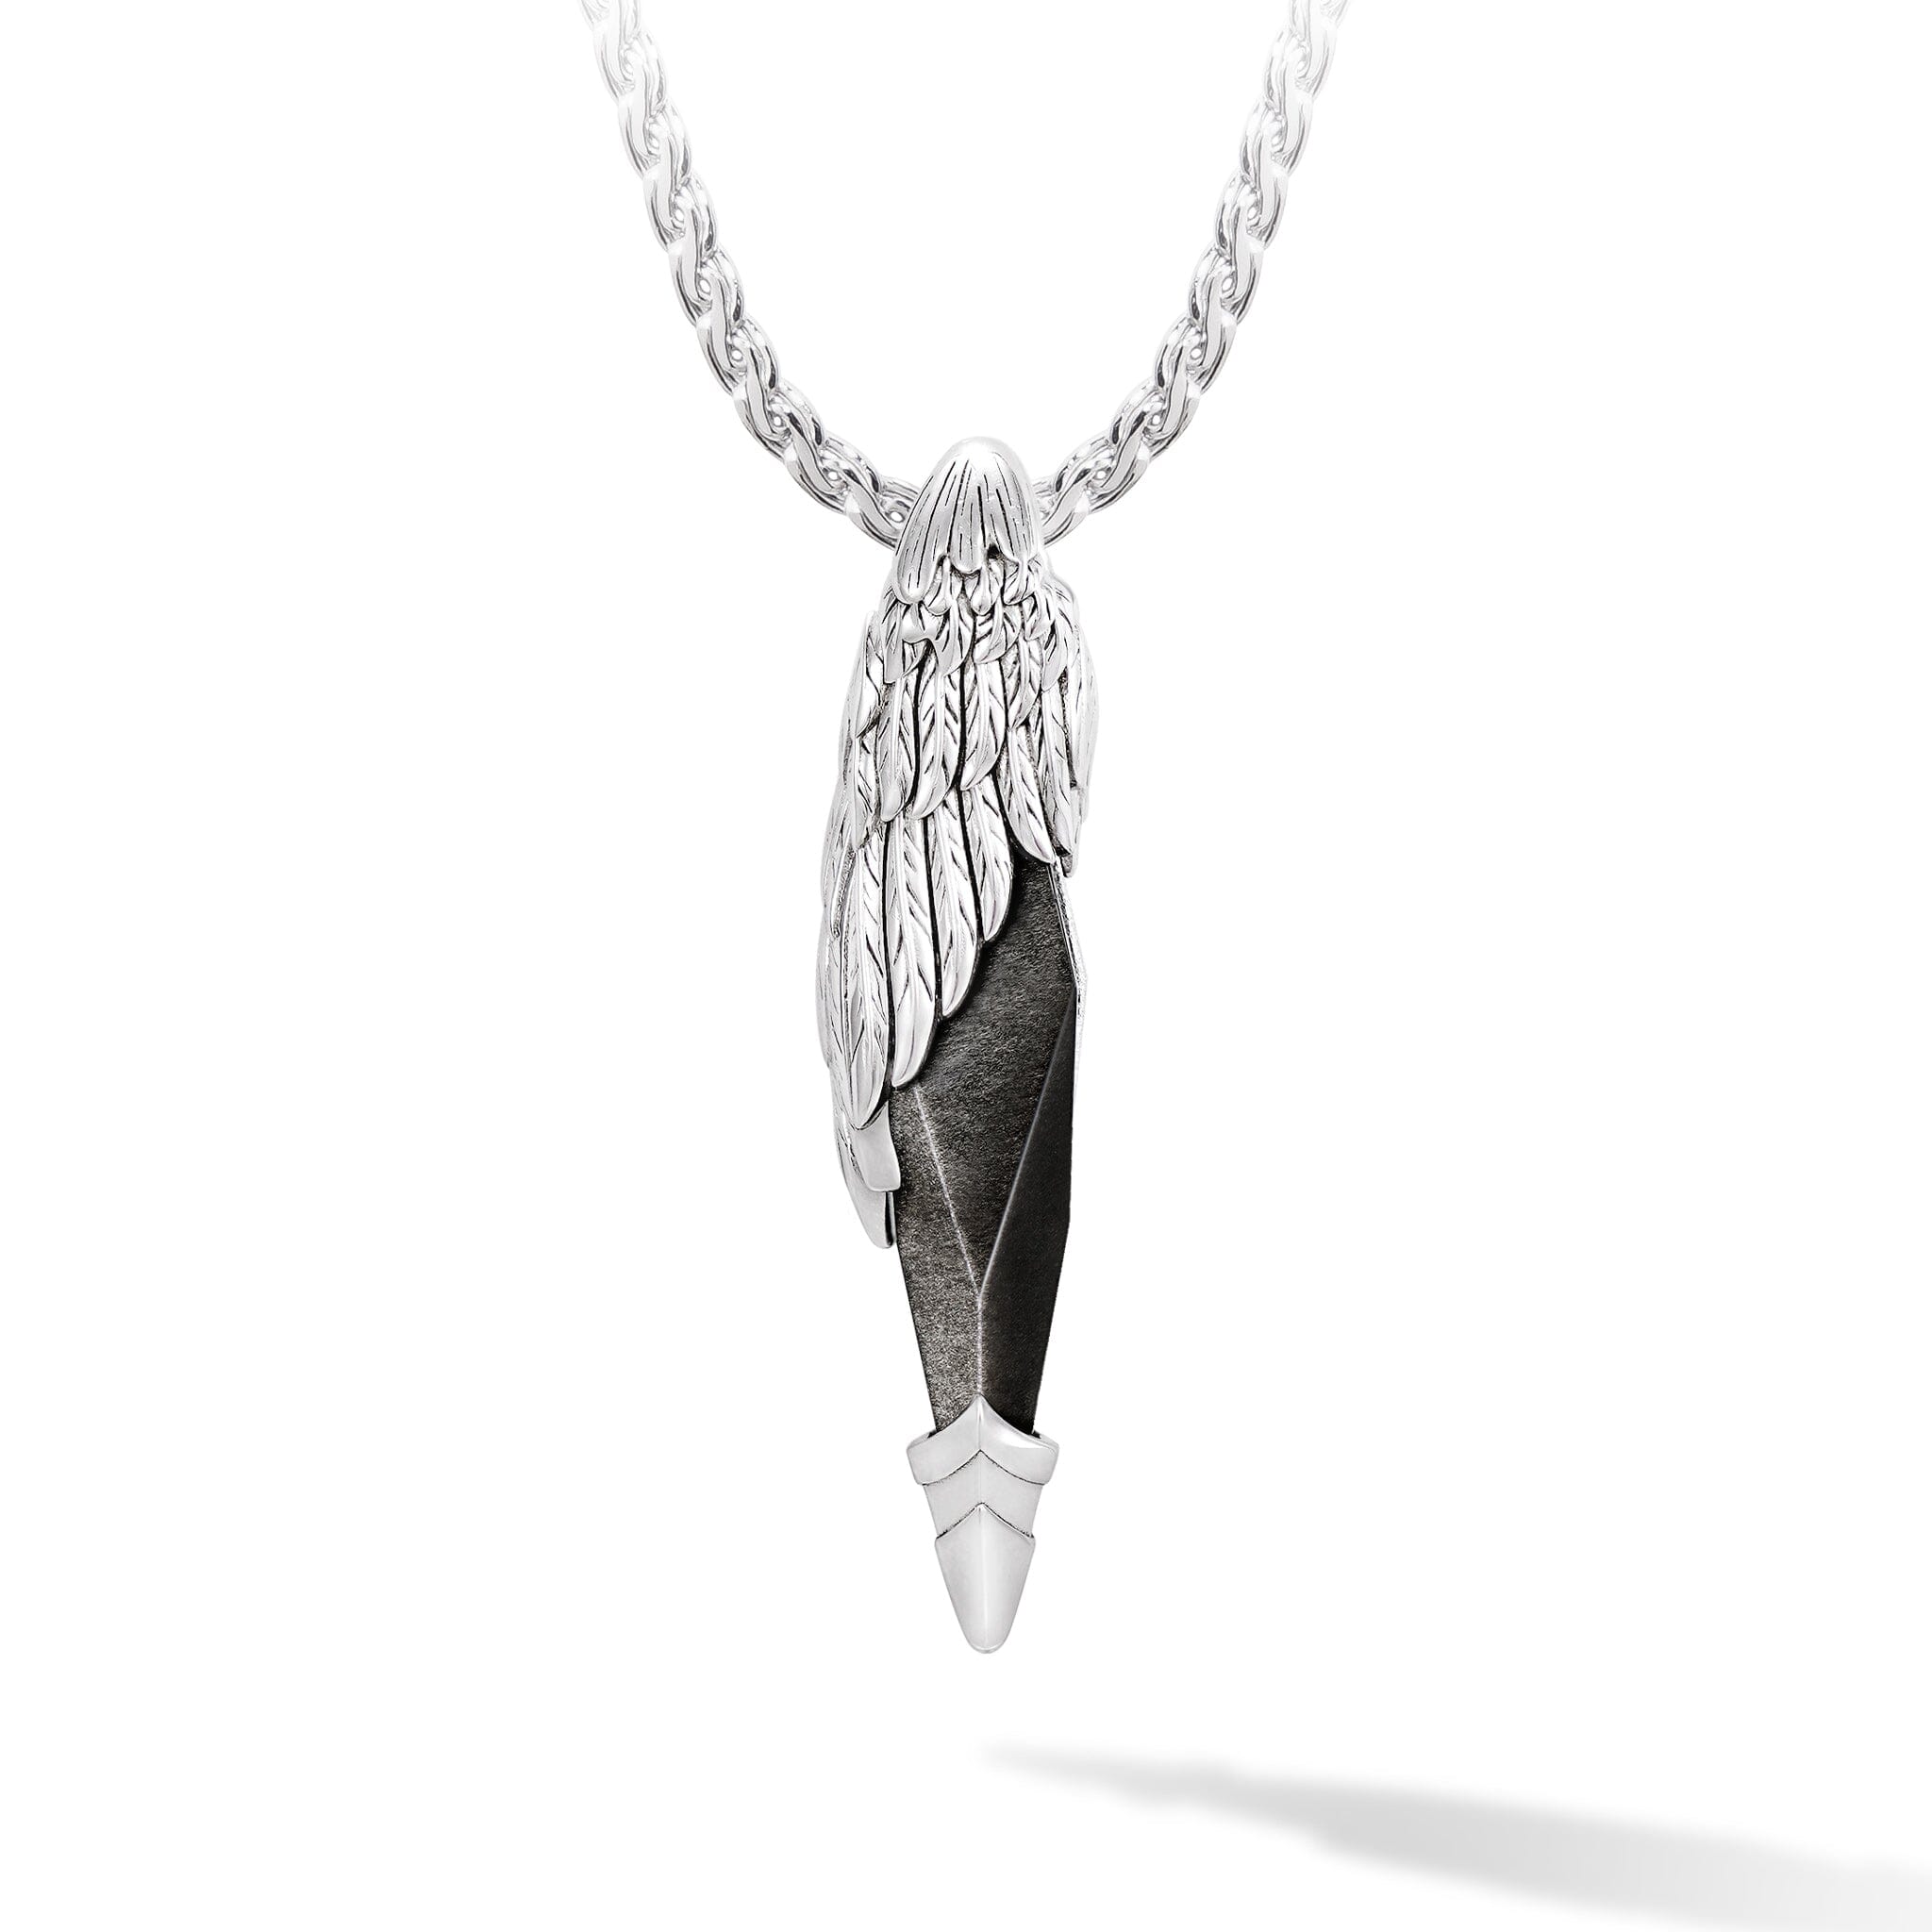 Seraph Wing Silver Obsidian Pendant Necklace Necklaces AWNL Silver Set 55cm 